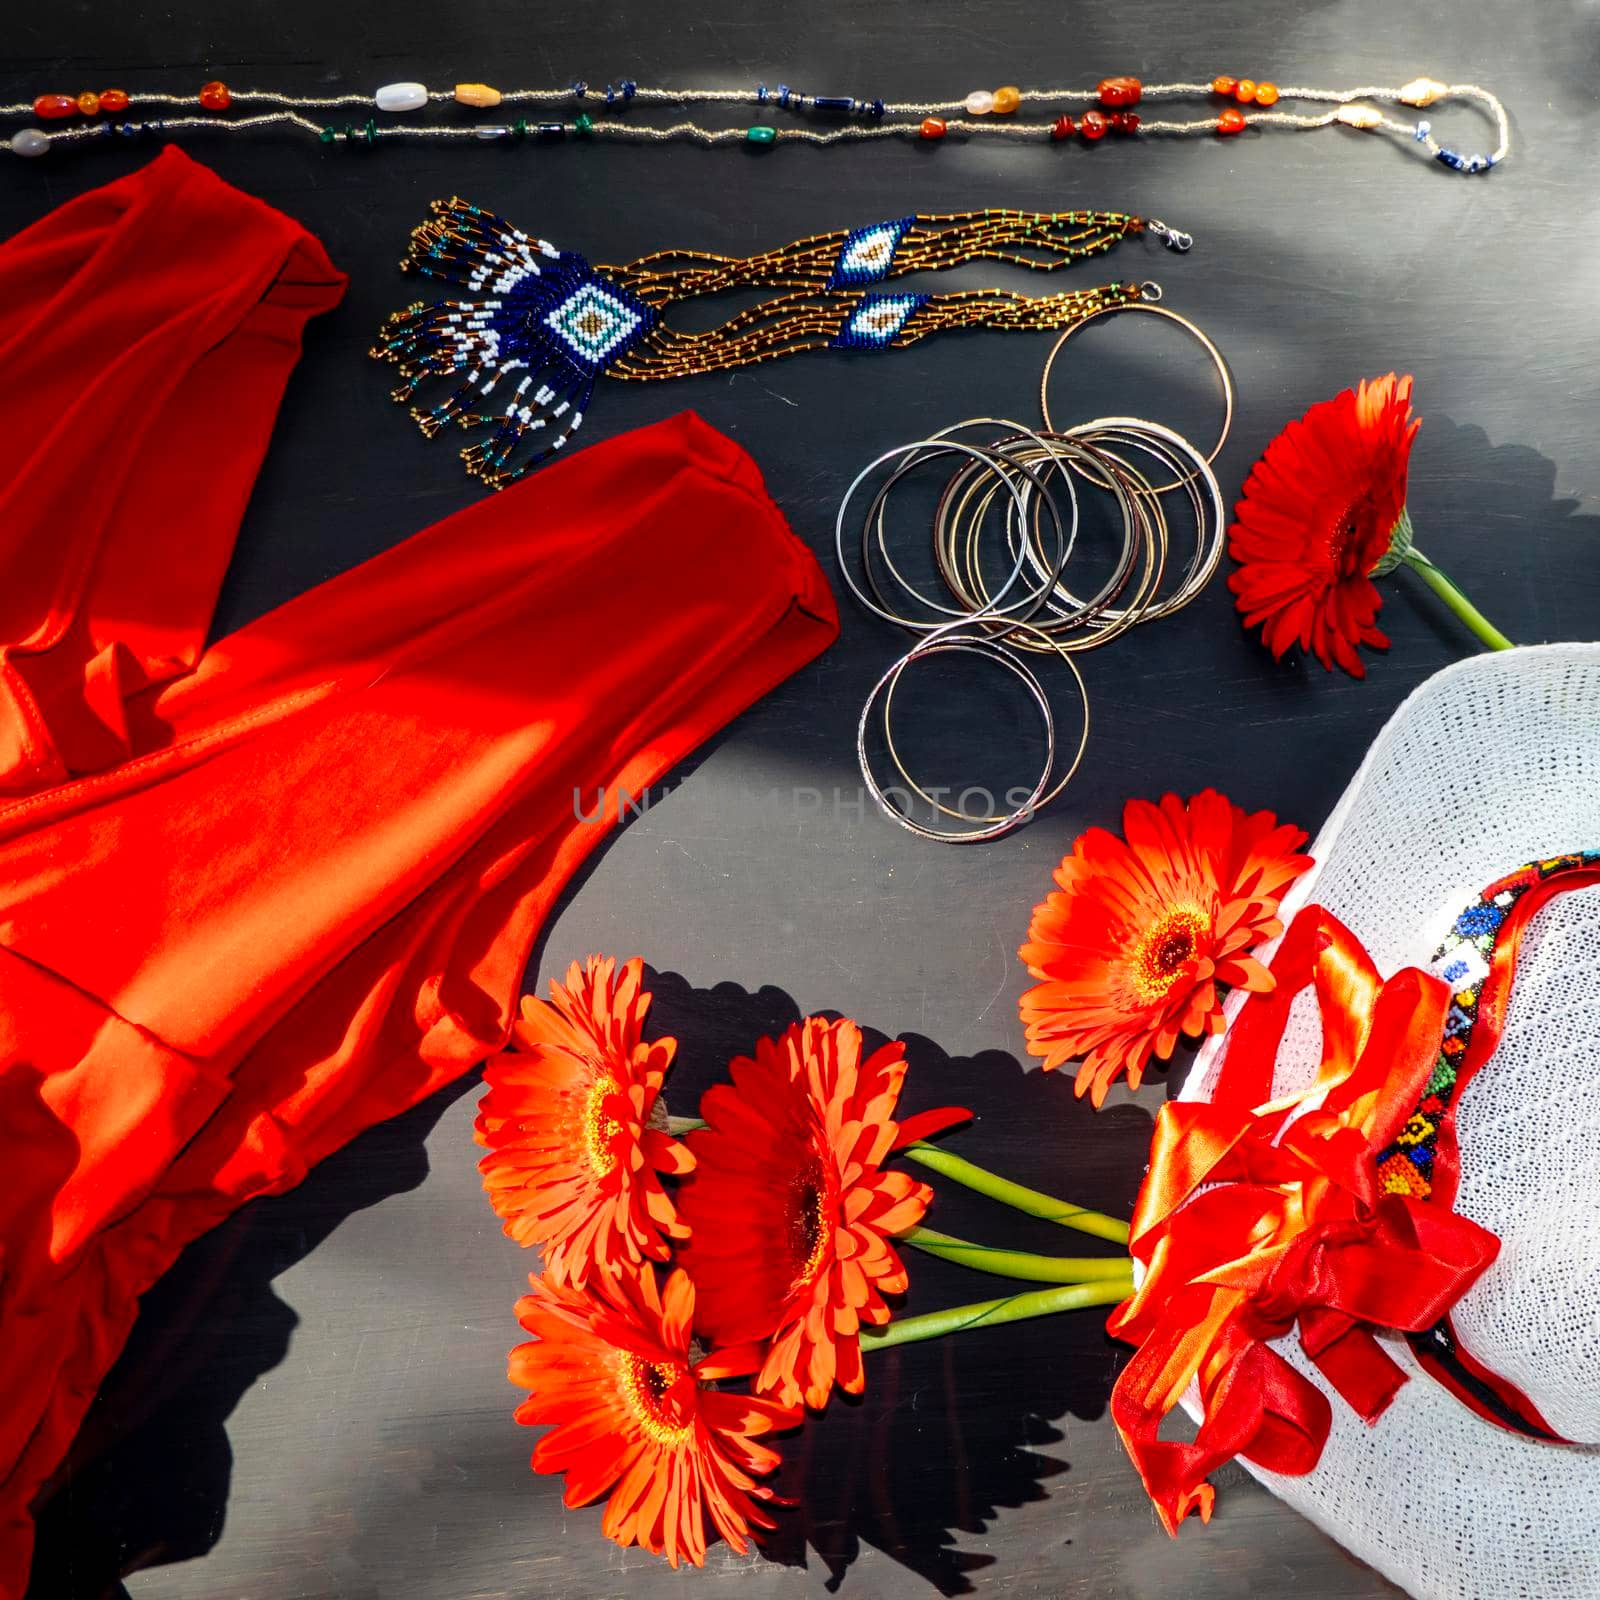 flat lay of a fashionable look from red and white accessories on a black background. Scarlet dress and white hat with a ribbon, jewelry made of beads and small stones, light jingling bracelets